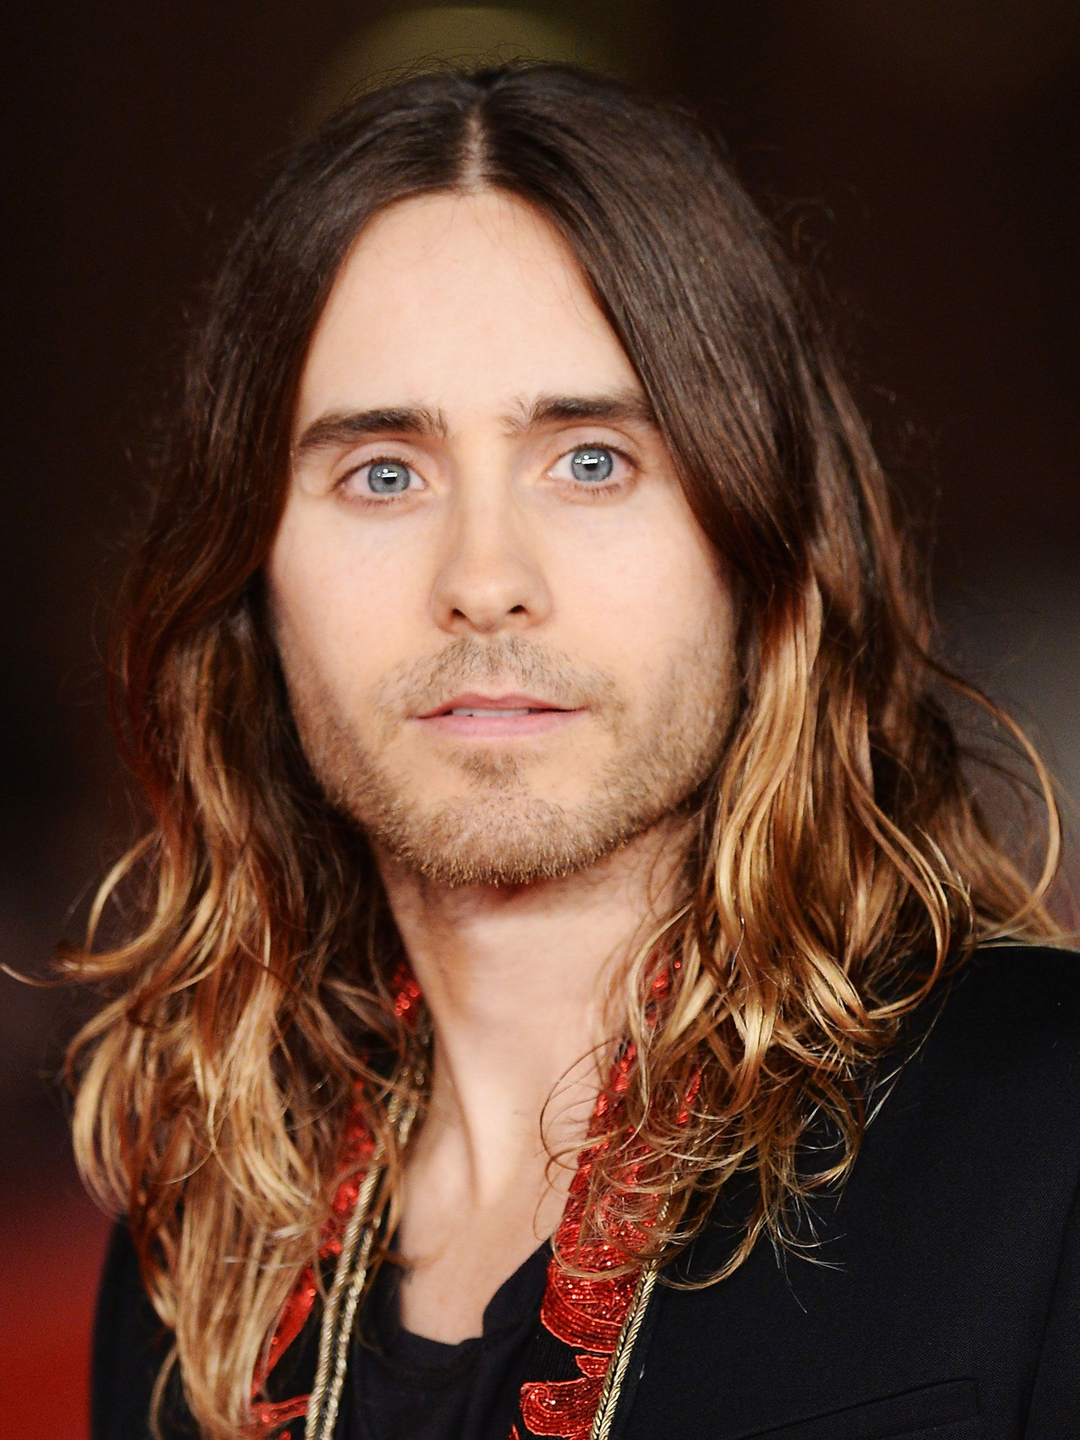 Jared Leto current look